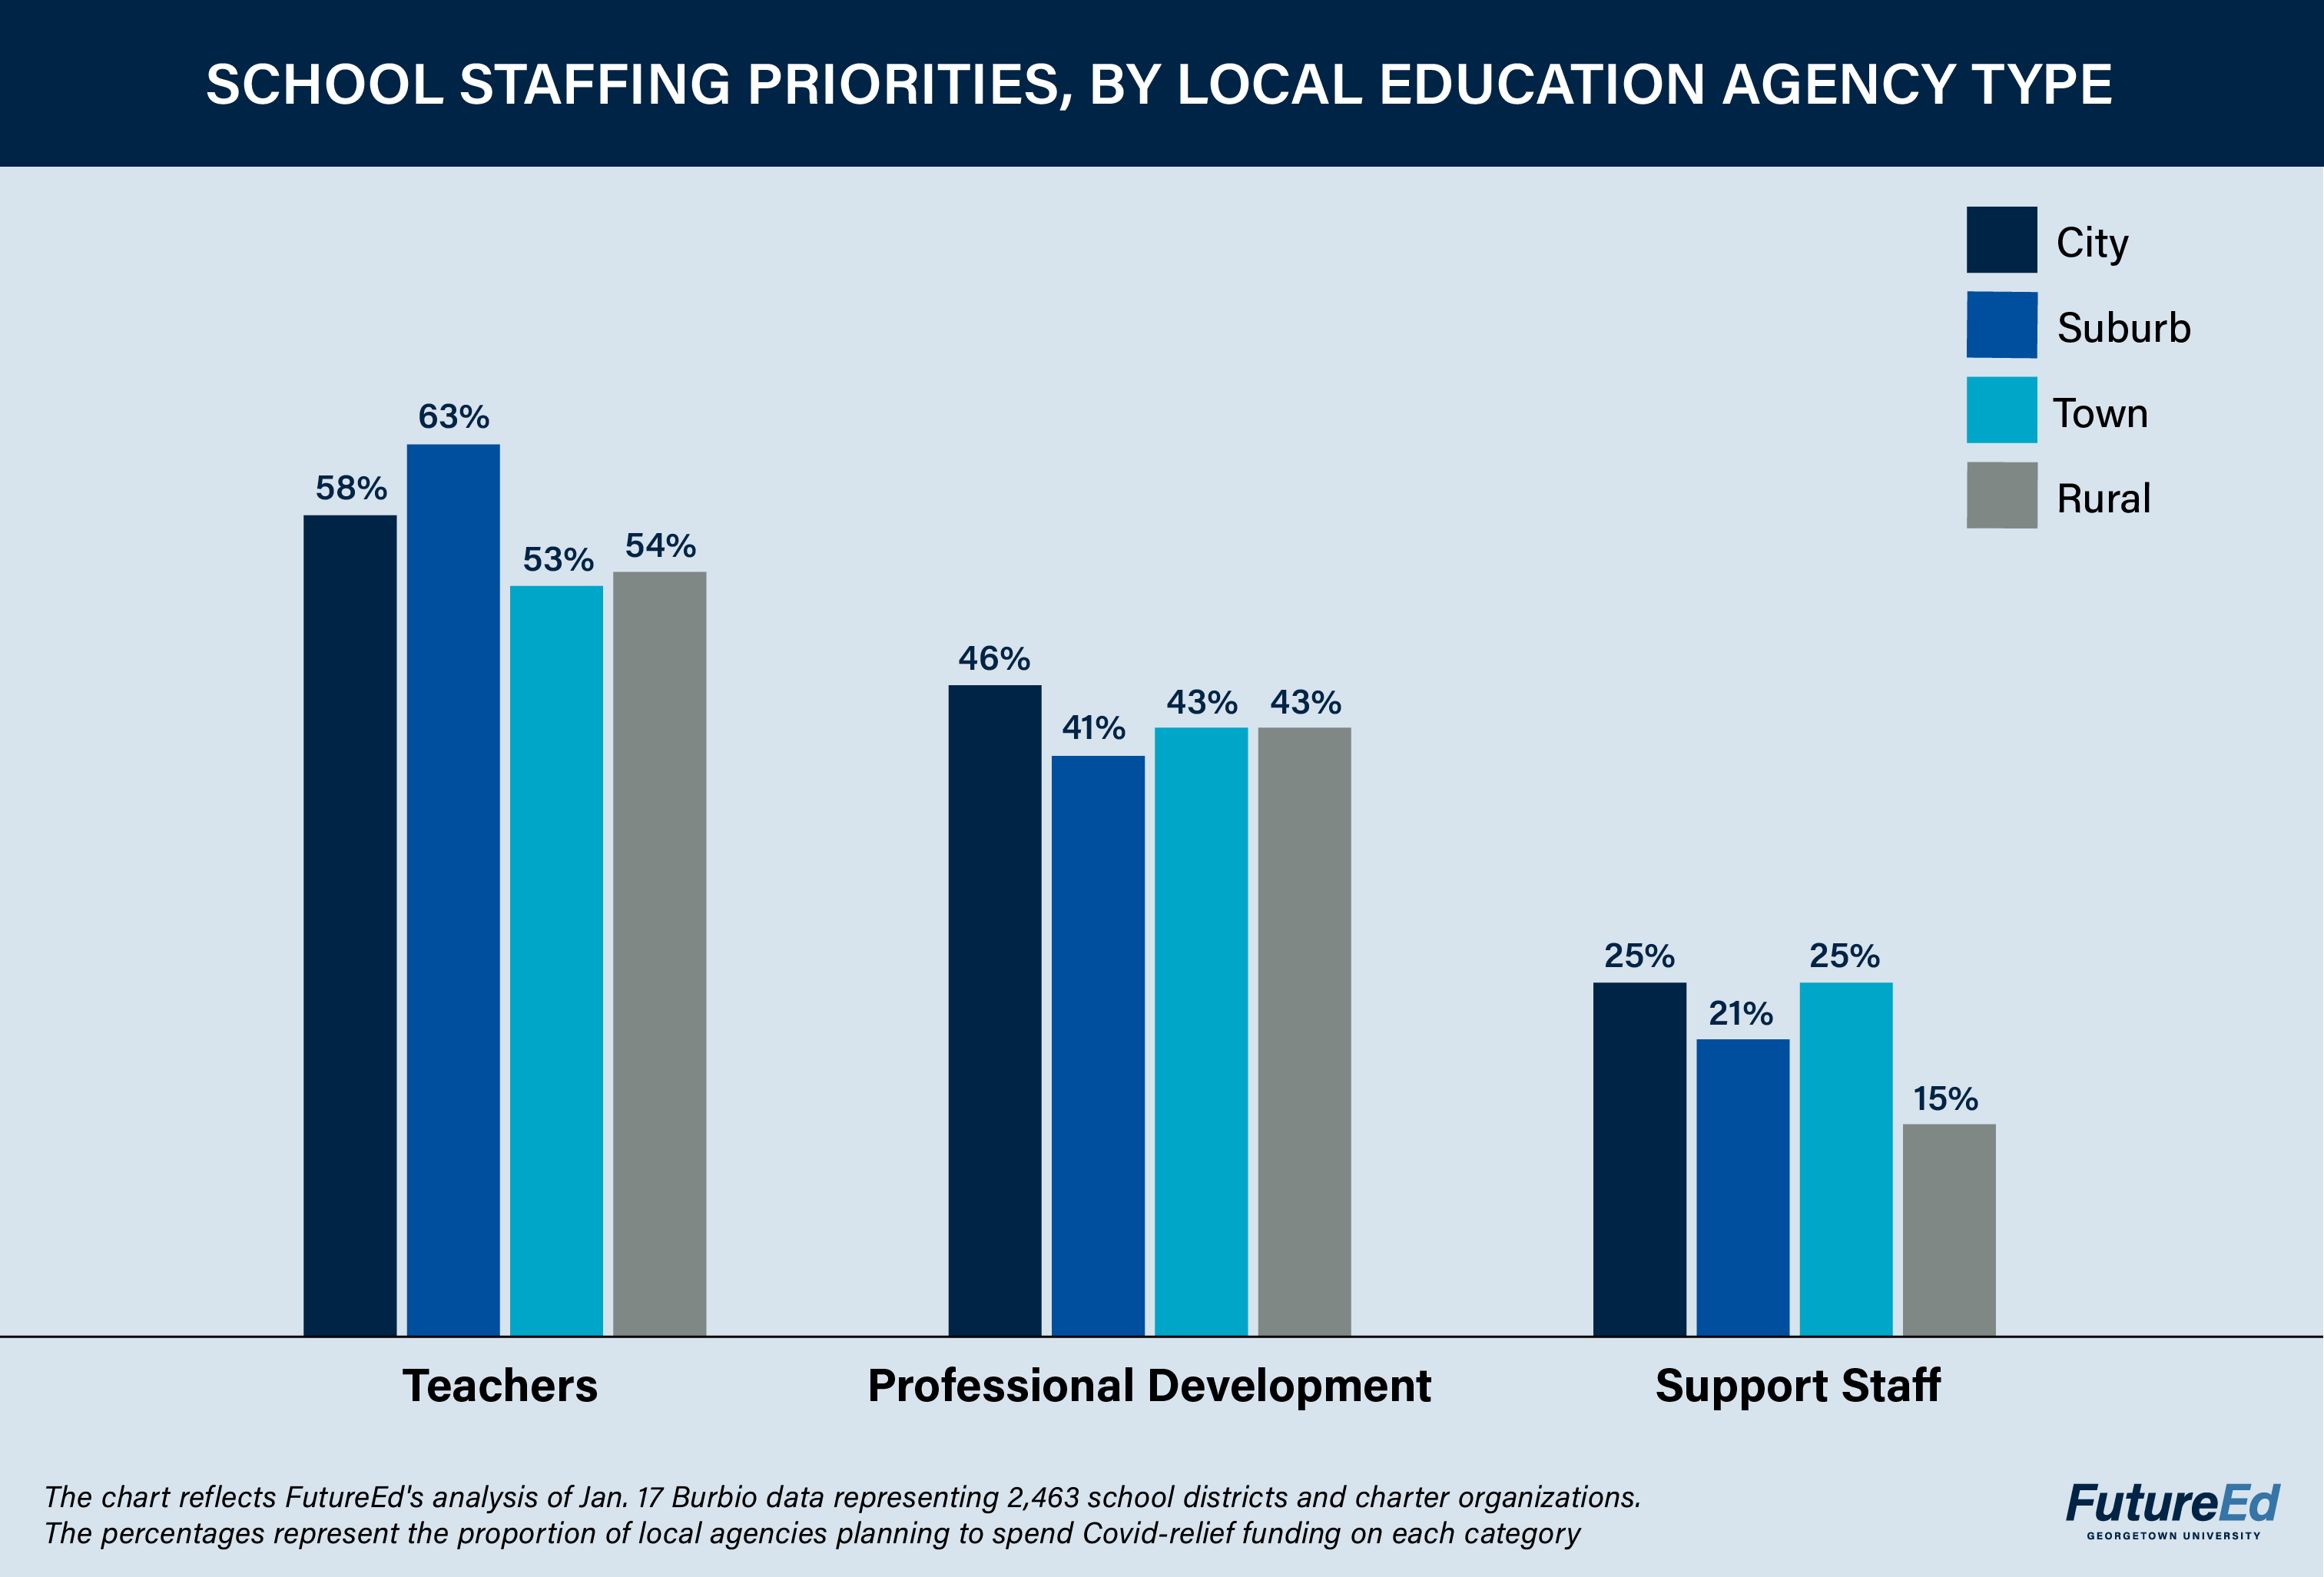 School Staffing Priorities by Local Education Agency Type